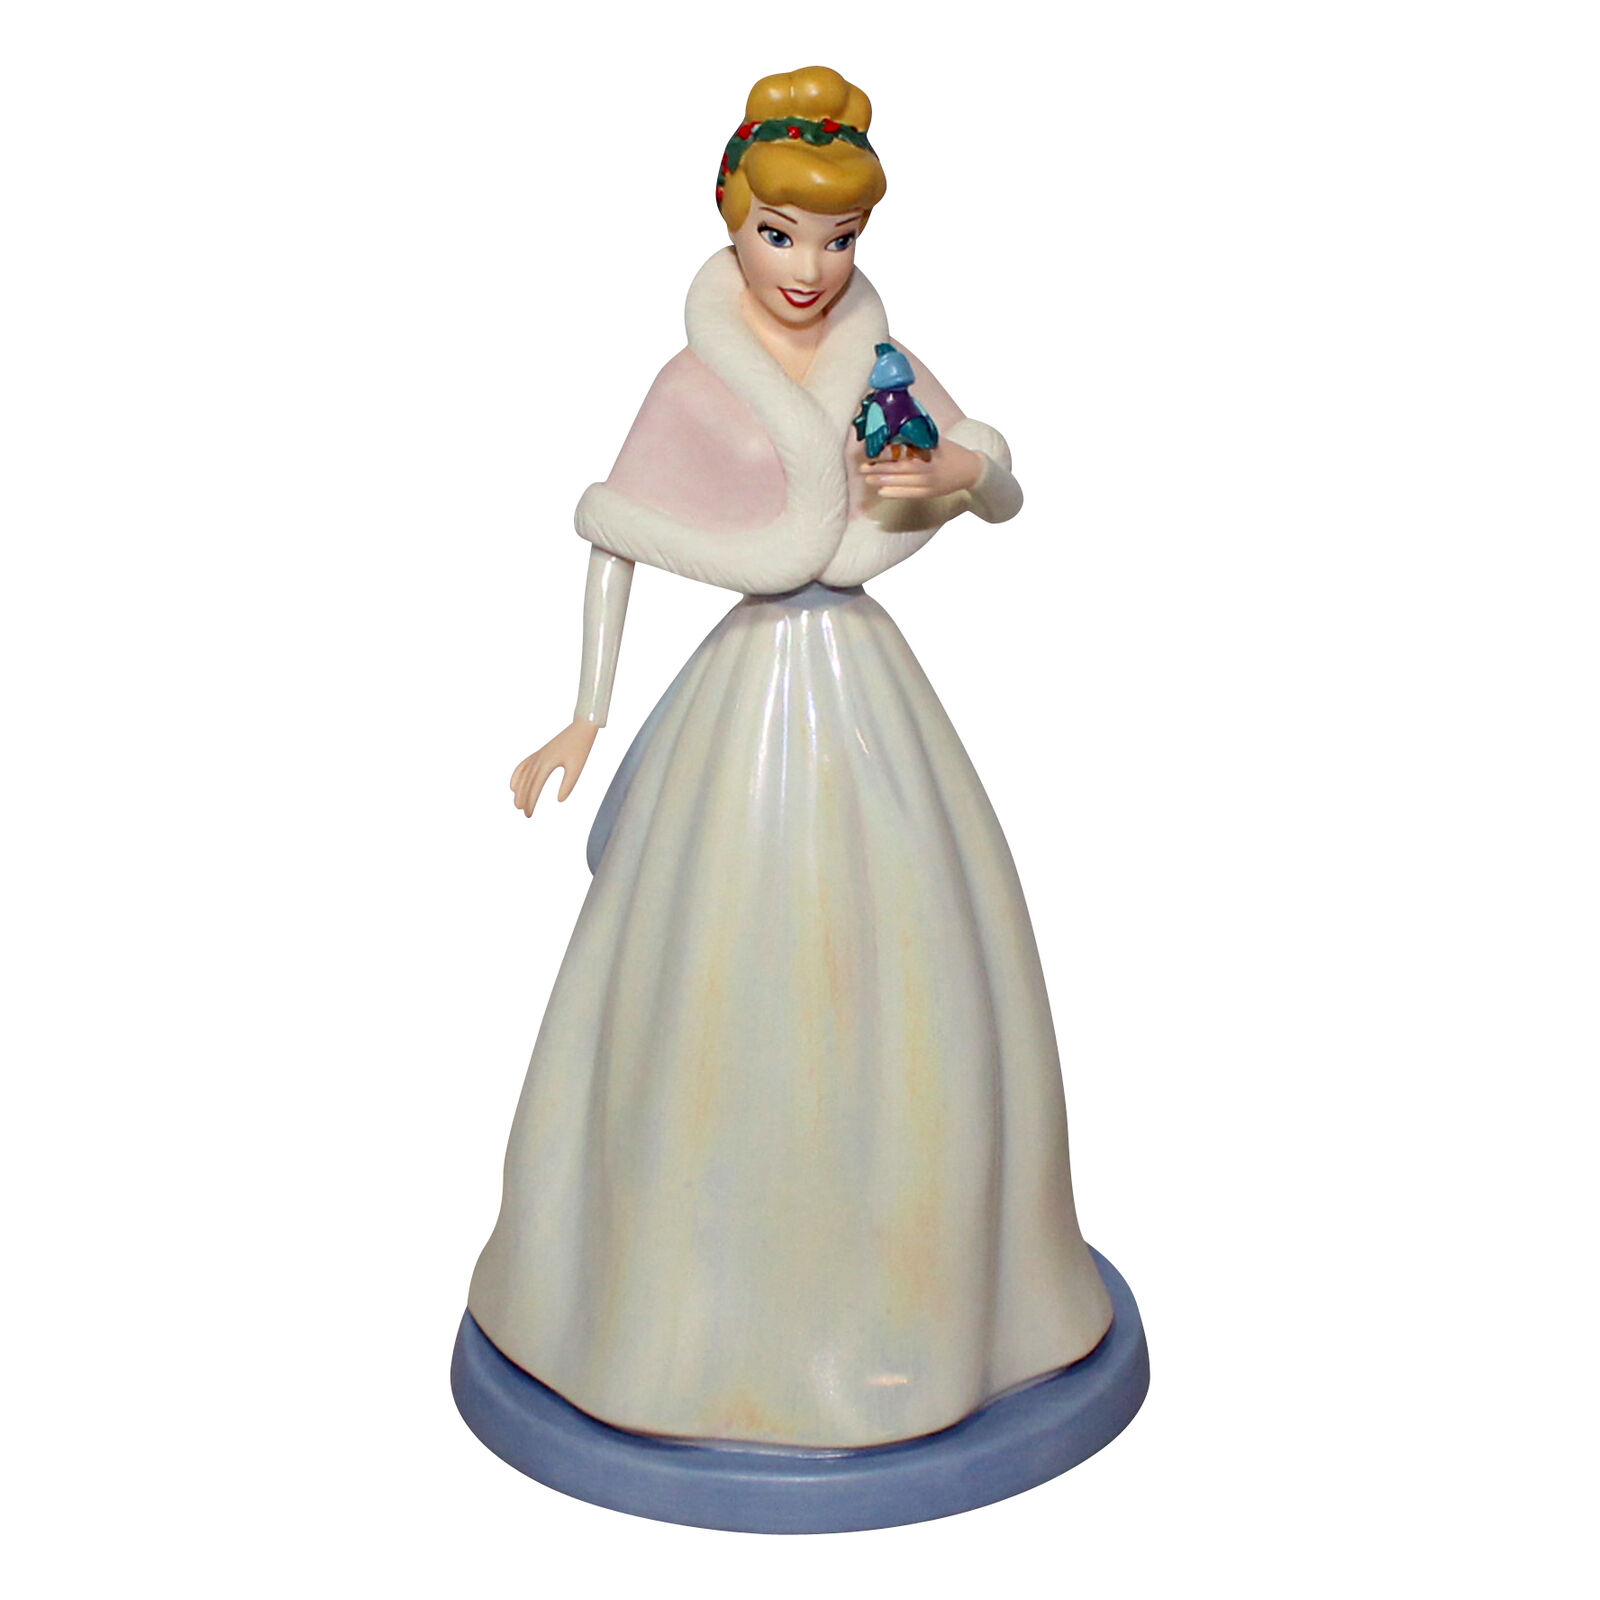 WDCC Cinderella - The Gift of Kindness | 4004523 | Disney | New in Box